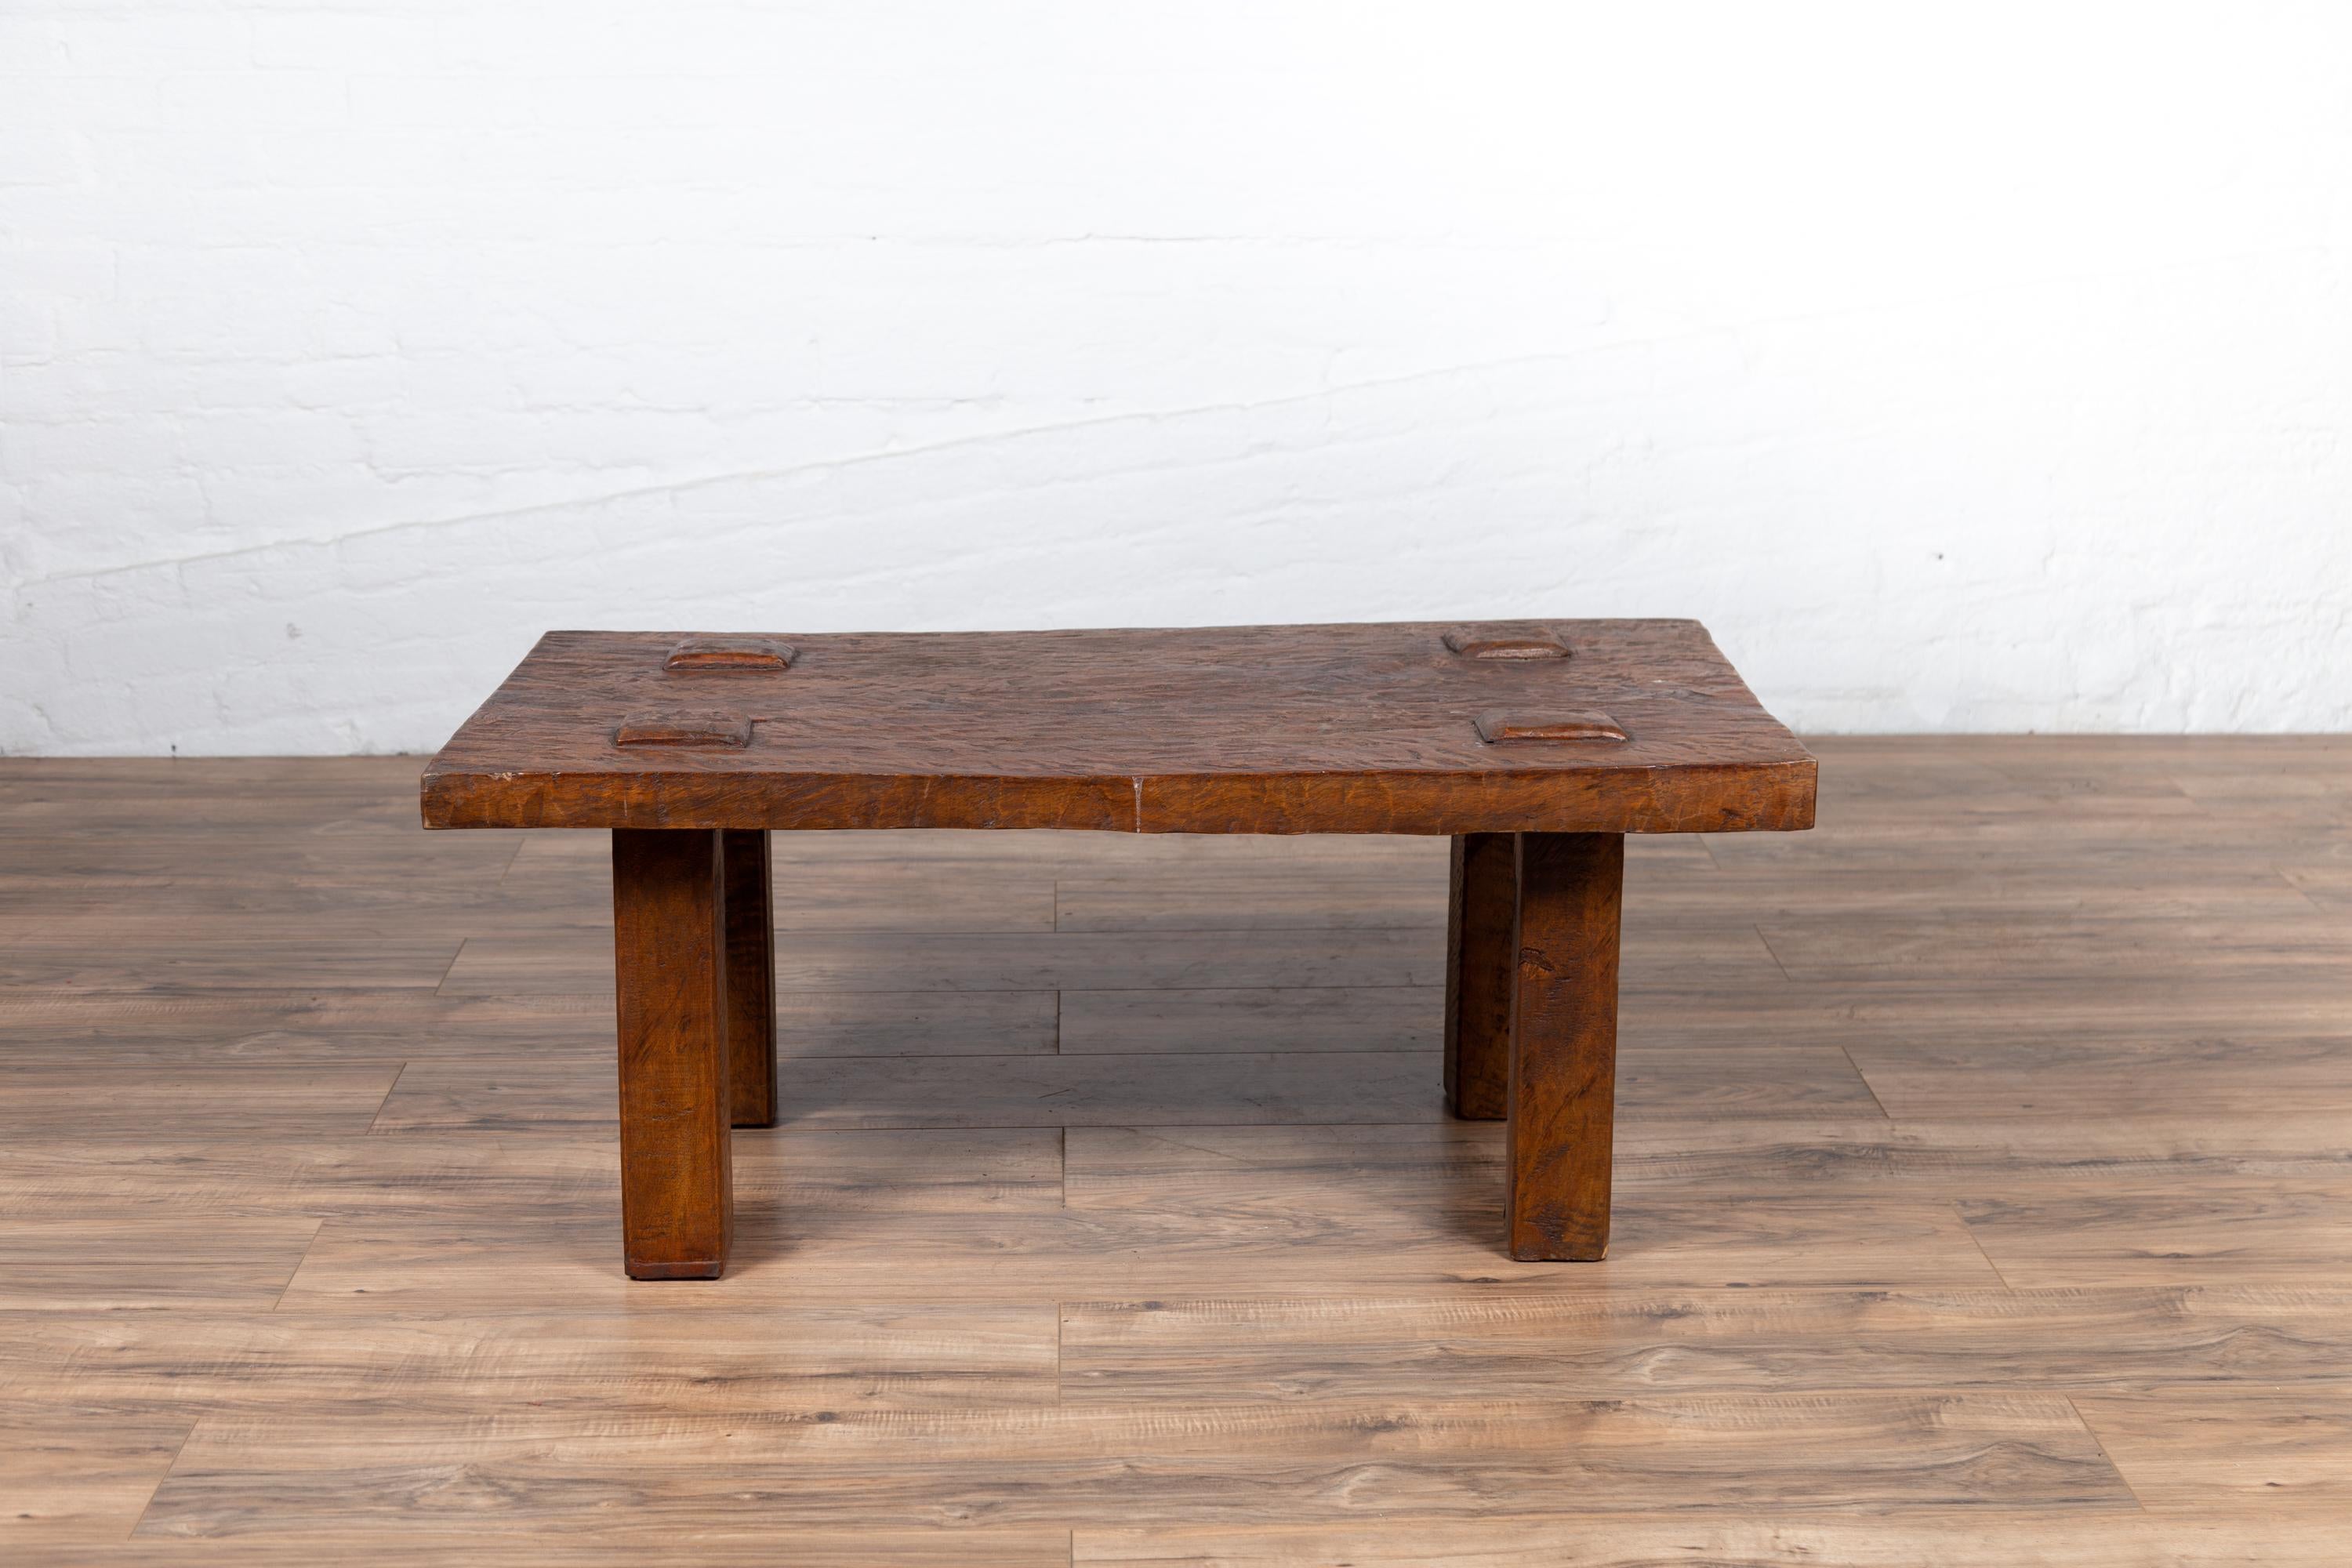 Vintage Indonesian Rustic Wooden Coffee Table with Square Legs and Raised Joints 5